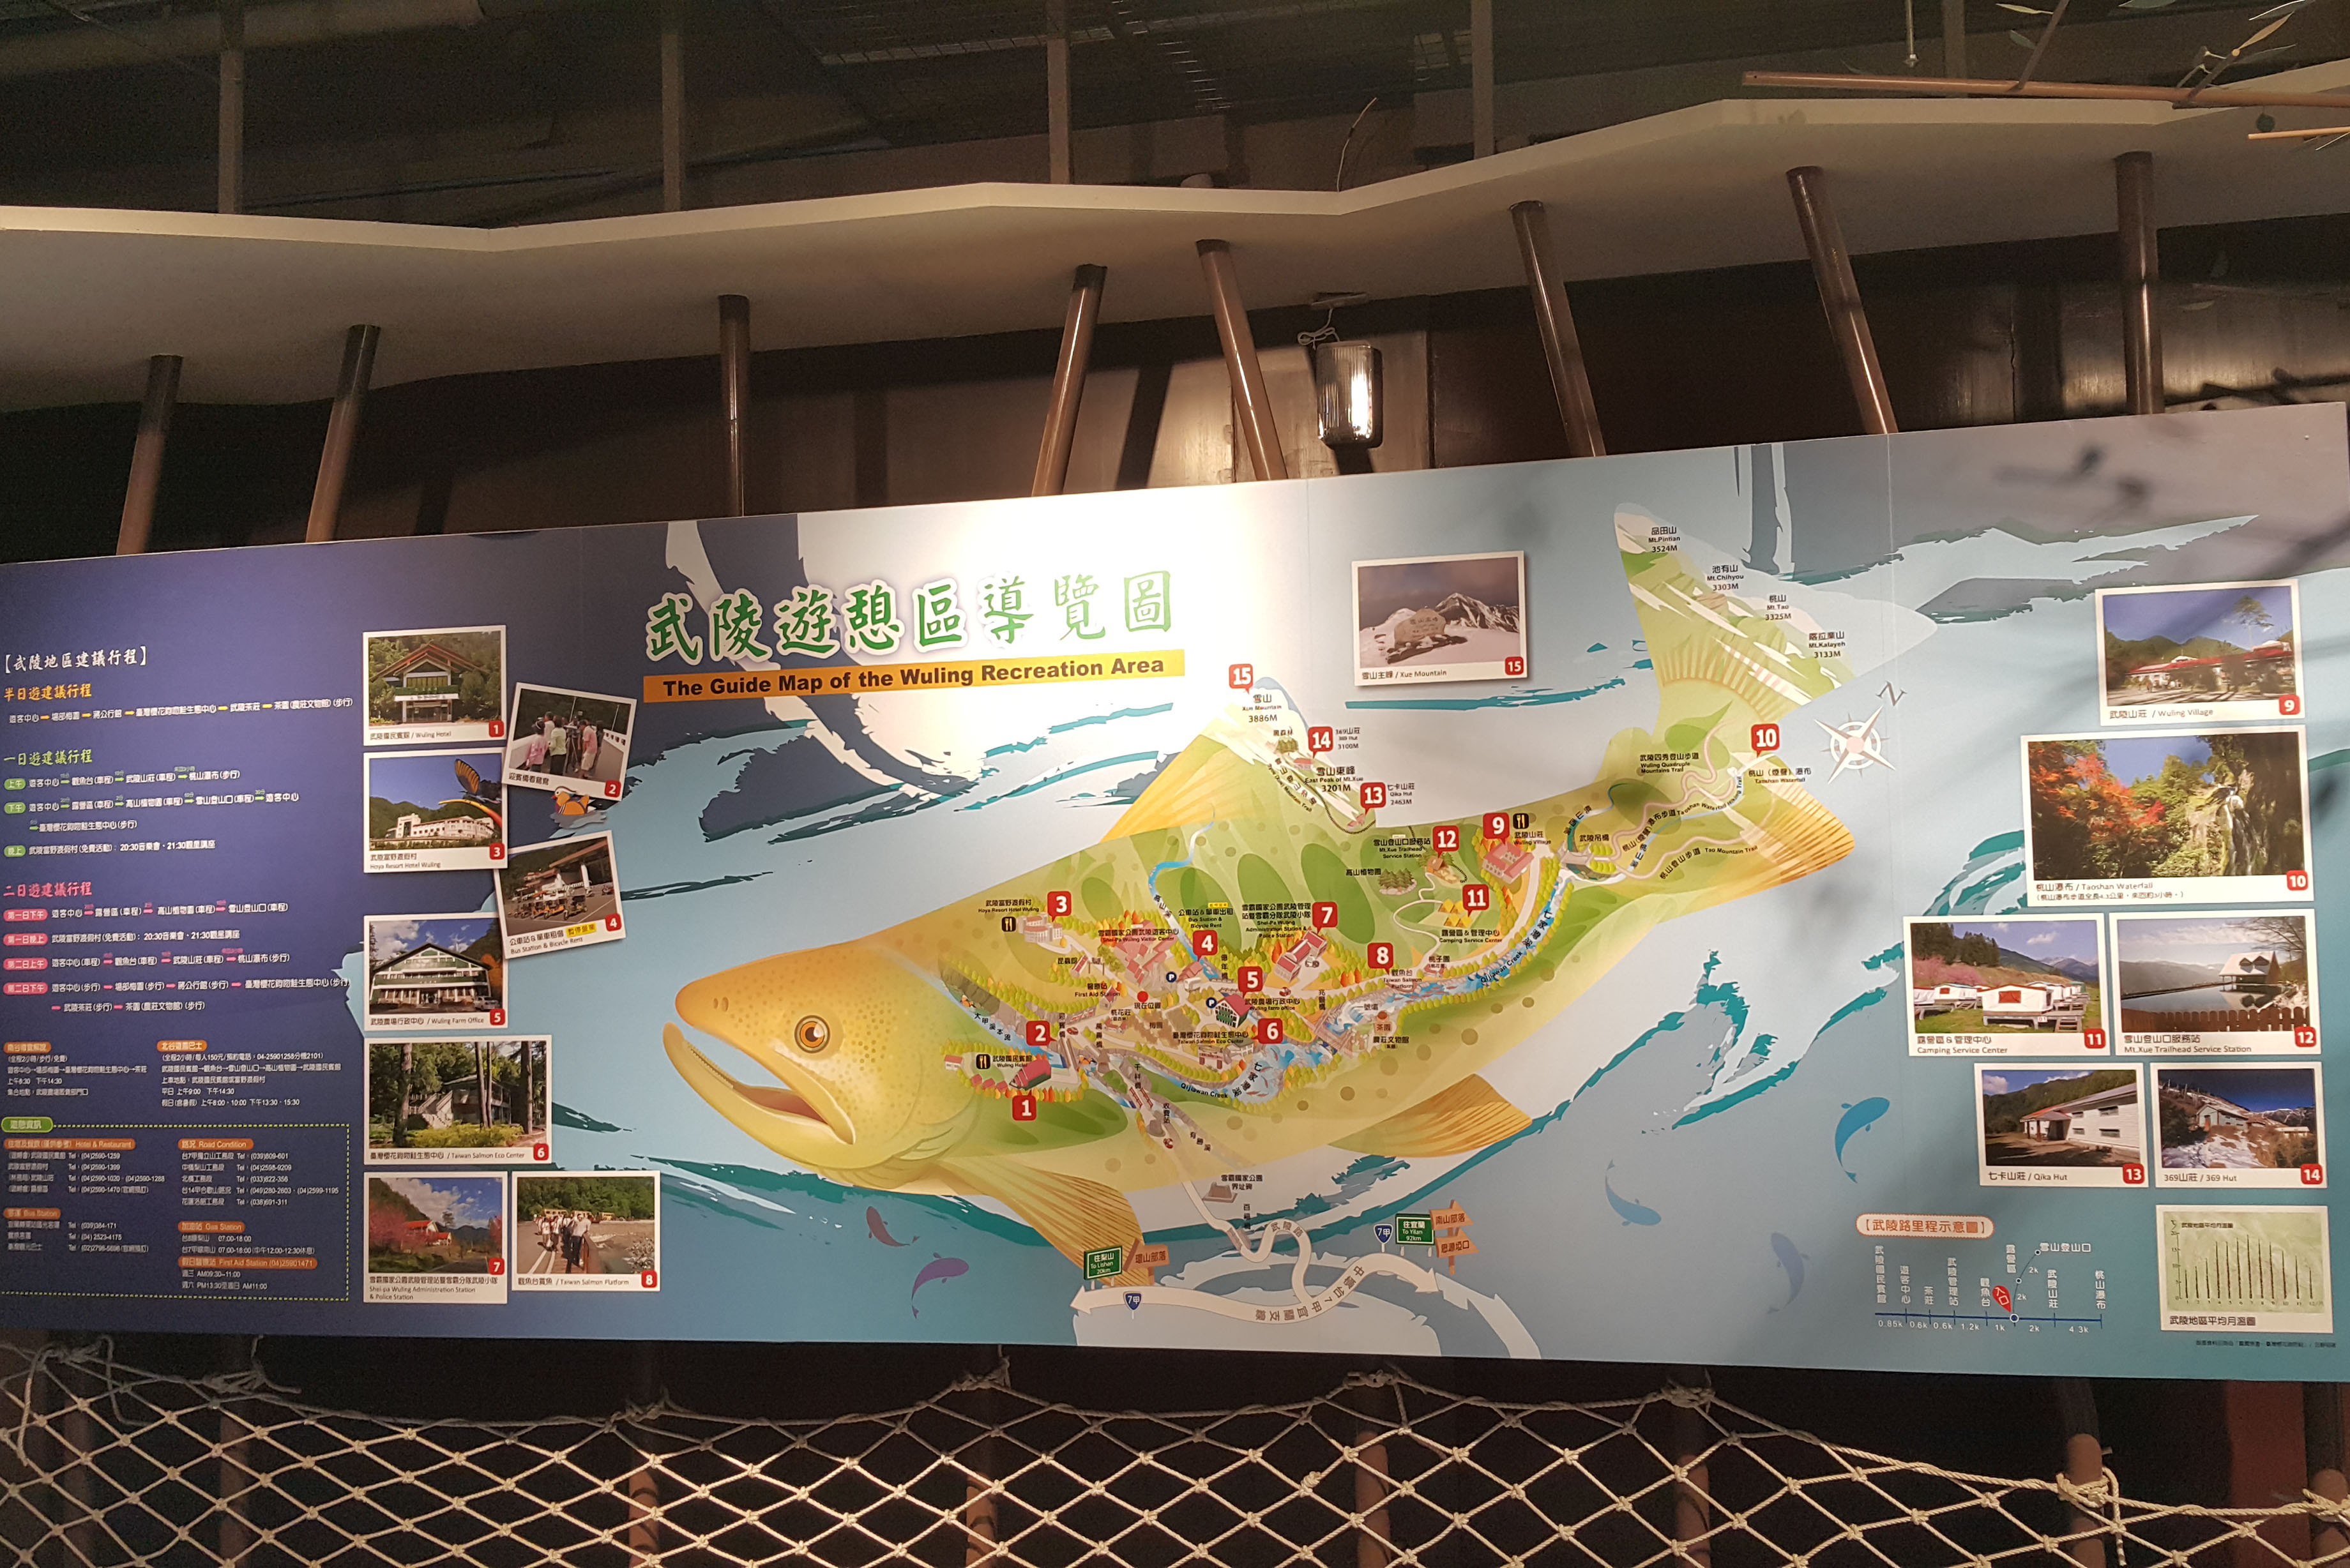 A panel of information about Wuling Recreation Area